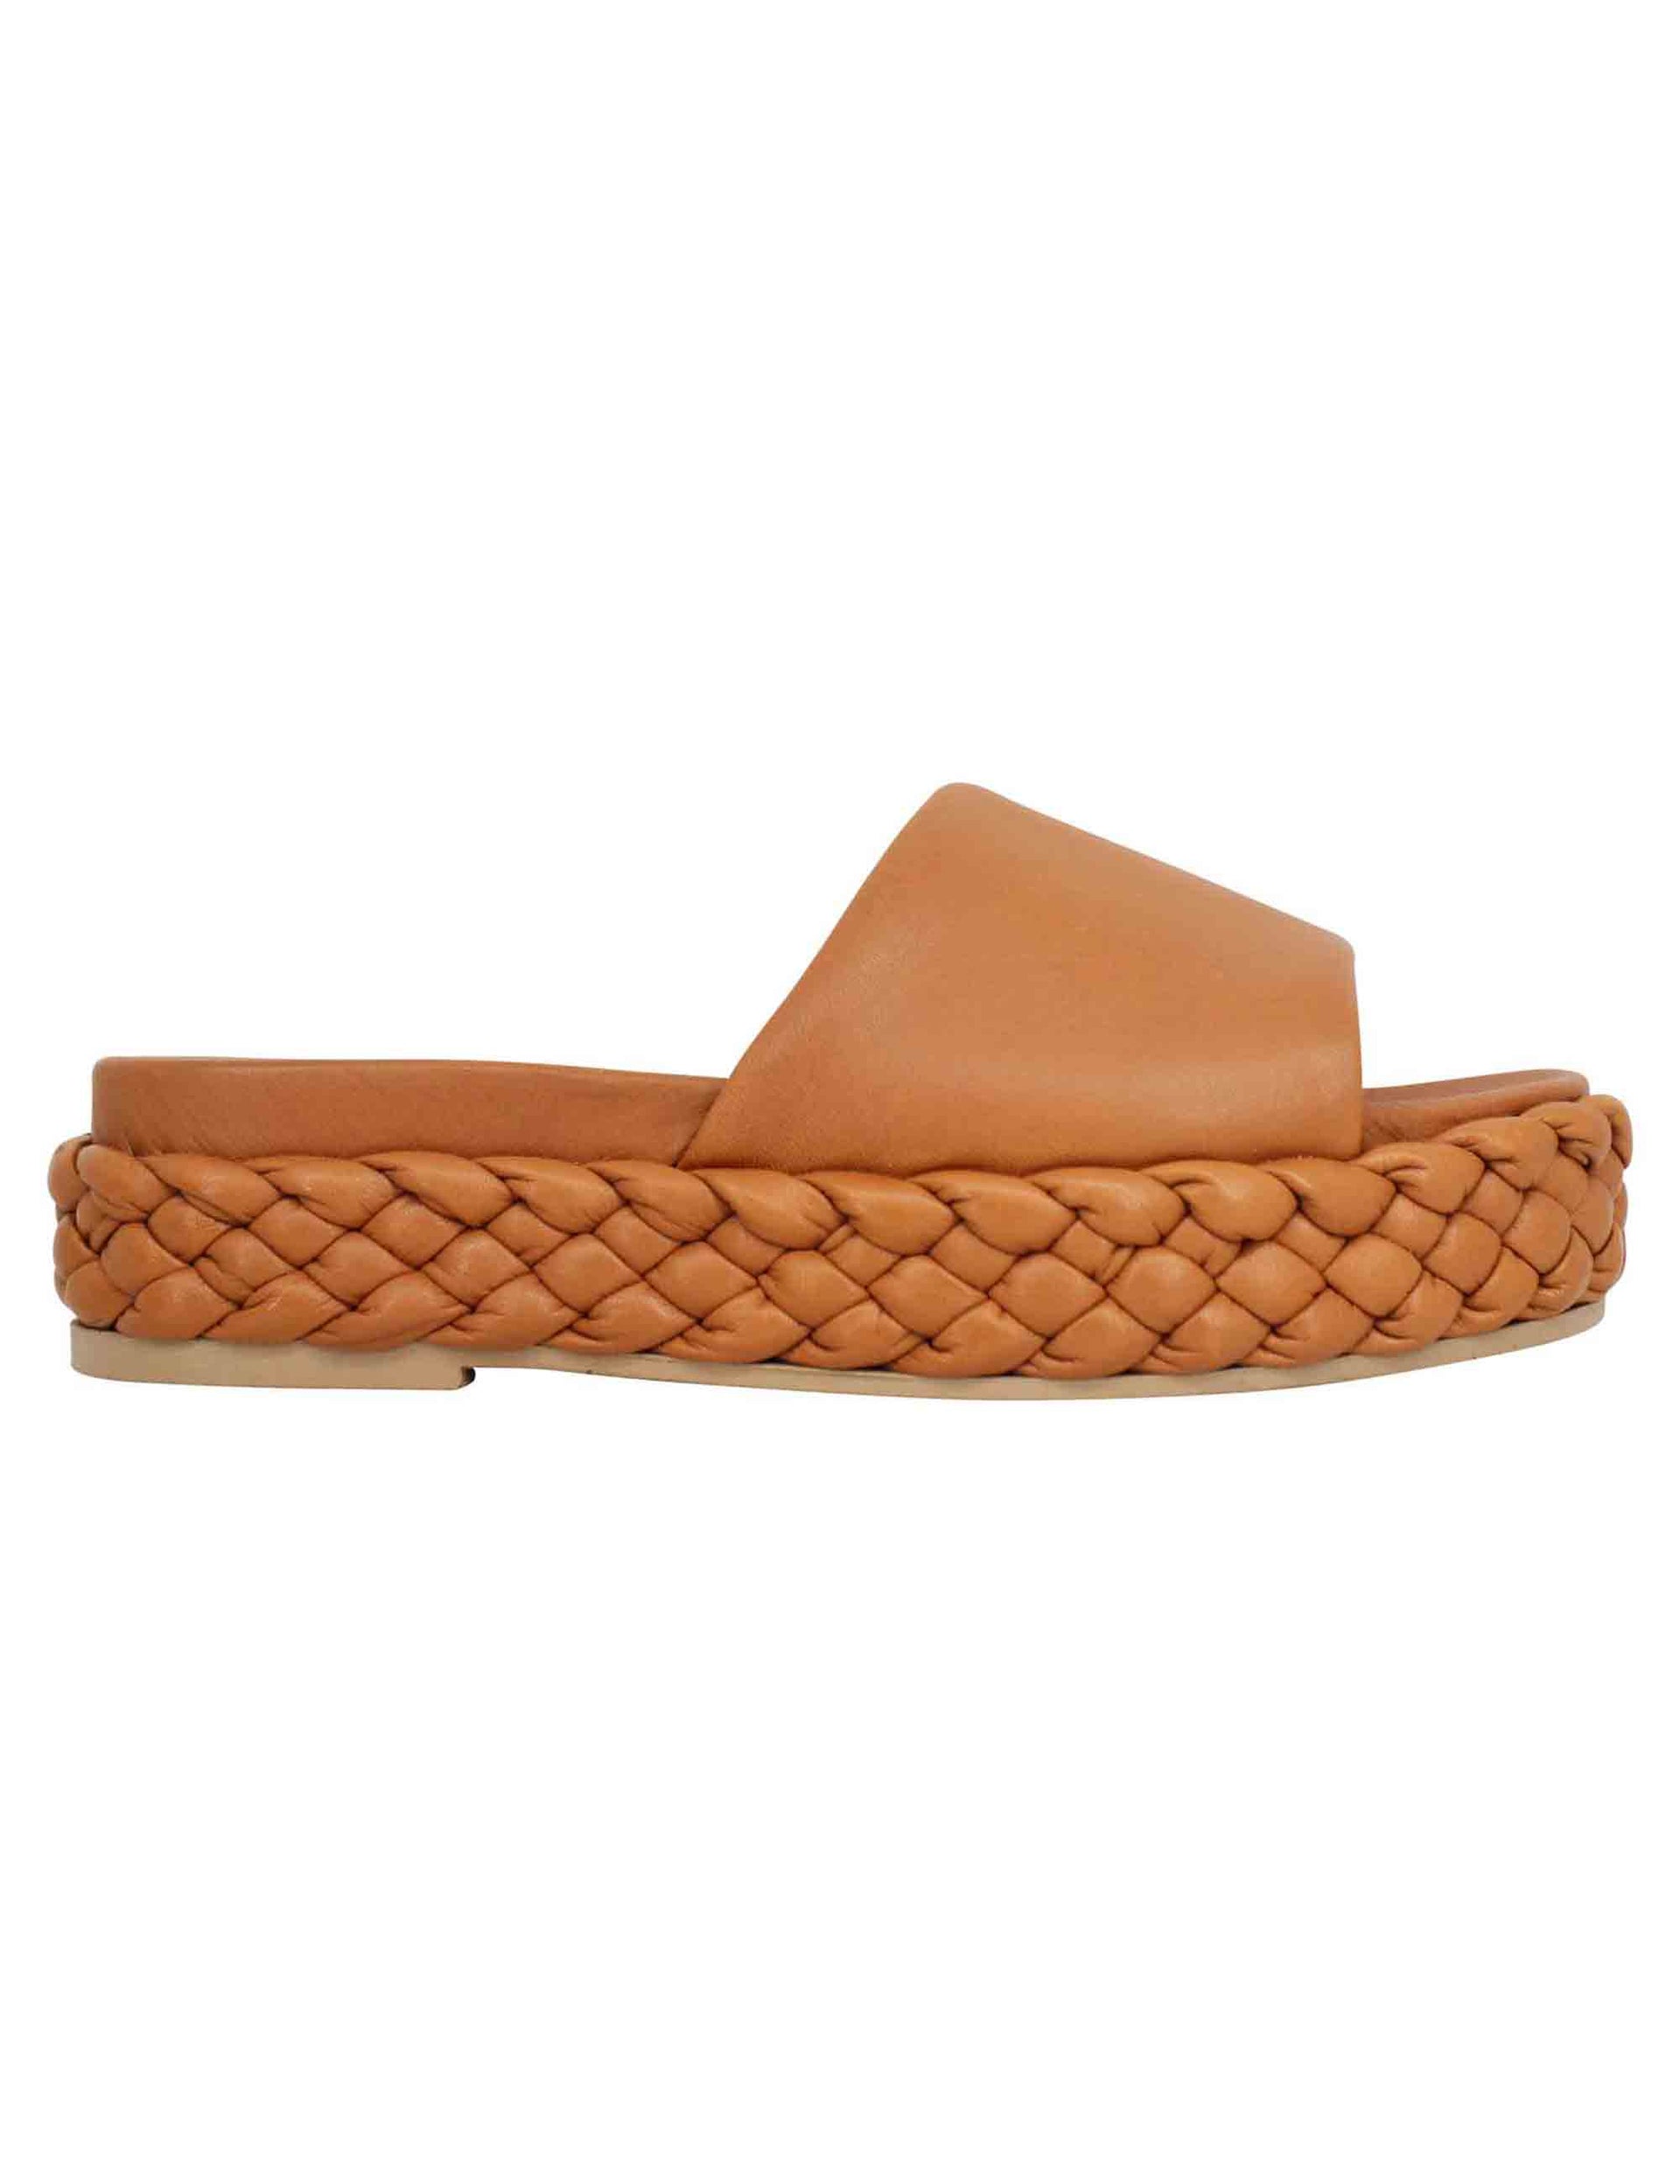 Women's tan leather sandals with low braided leather wedge